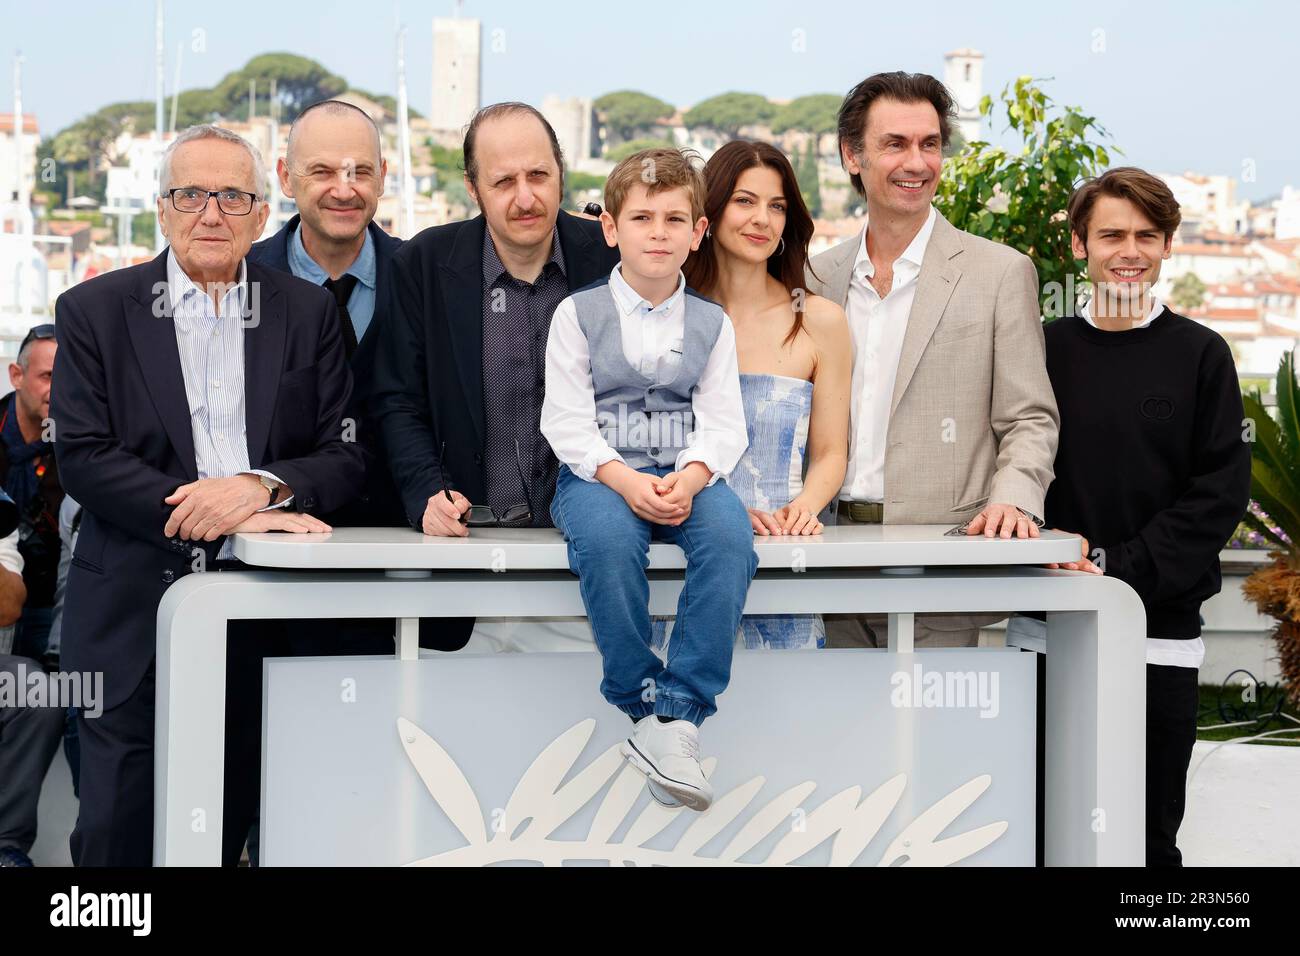 Marco Bellocchio, Paolo Pierobon, Fausto Russo Alesi, Enea Sala, Barbara Ronchi, Fabrizio Gifuni and Leonardo Maltese attend the 'Kidnapped' photocall during the 76th Cannes Film Festival at Palais des Festivals in Cannes, France, on 24 May 2023. Stock Photo